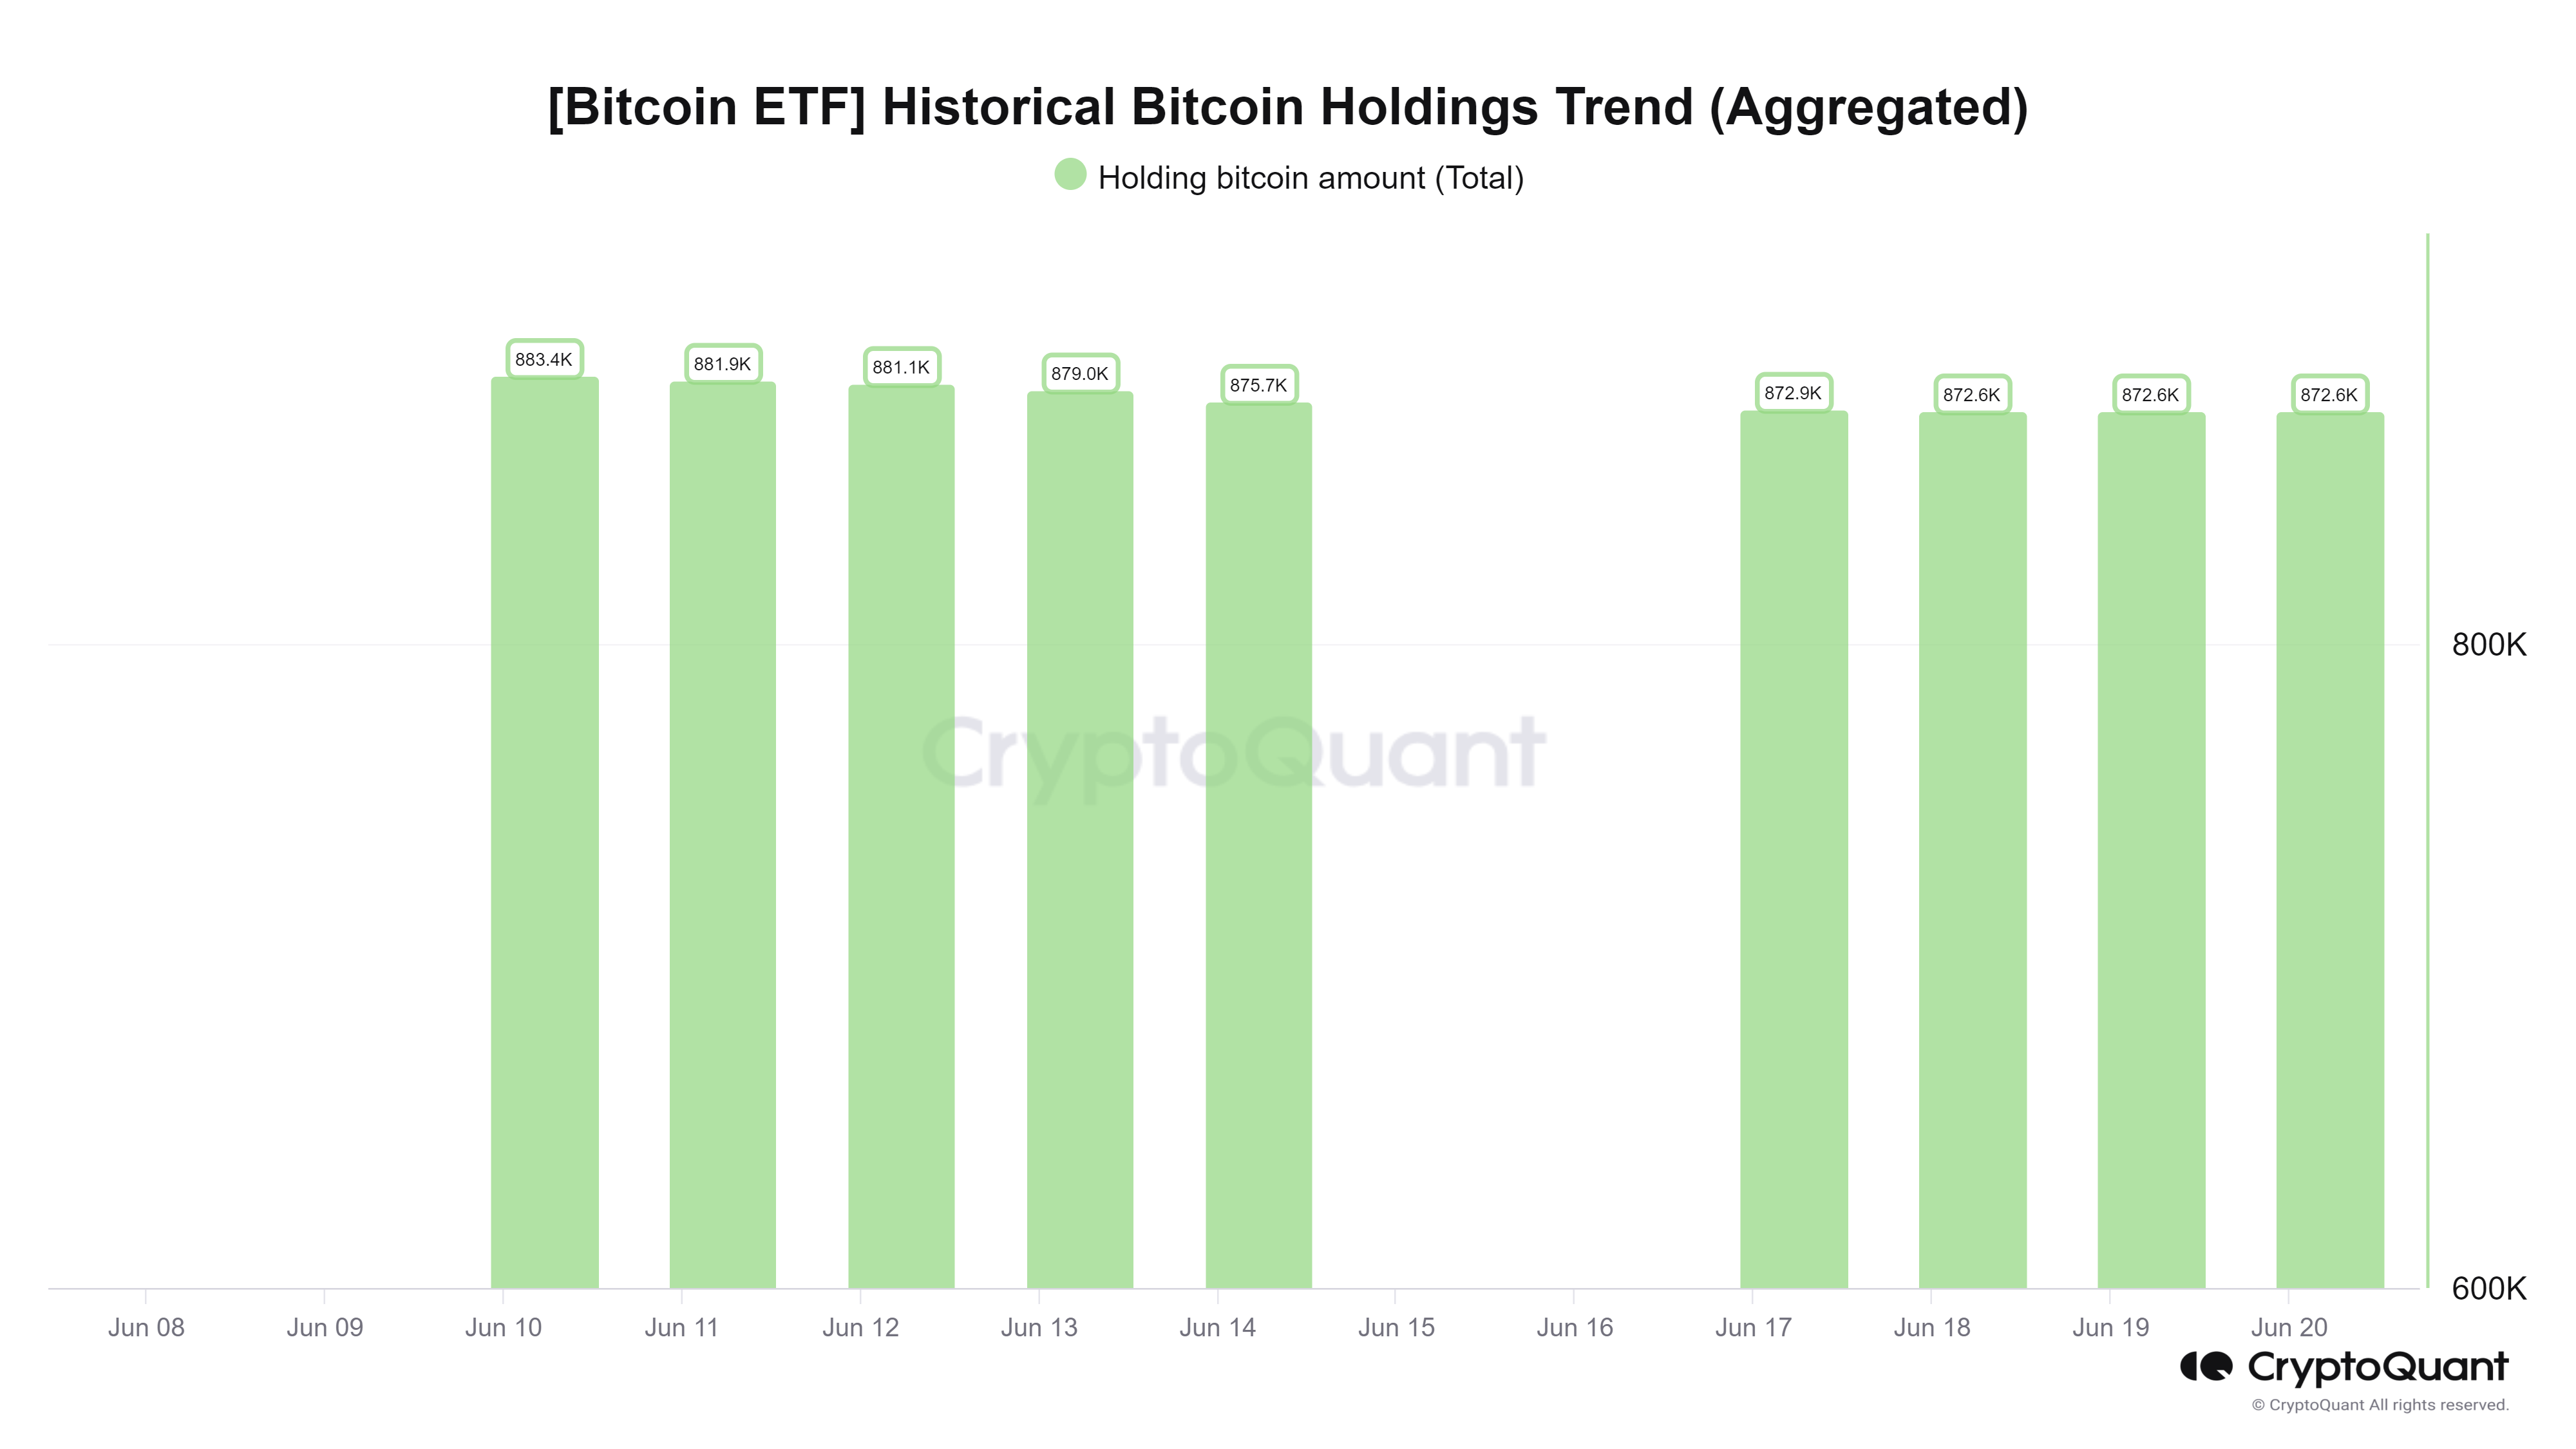 BTC ETF Historical Bitcoin Holdings Trend (Aggregated) chart